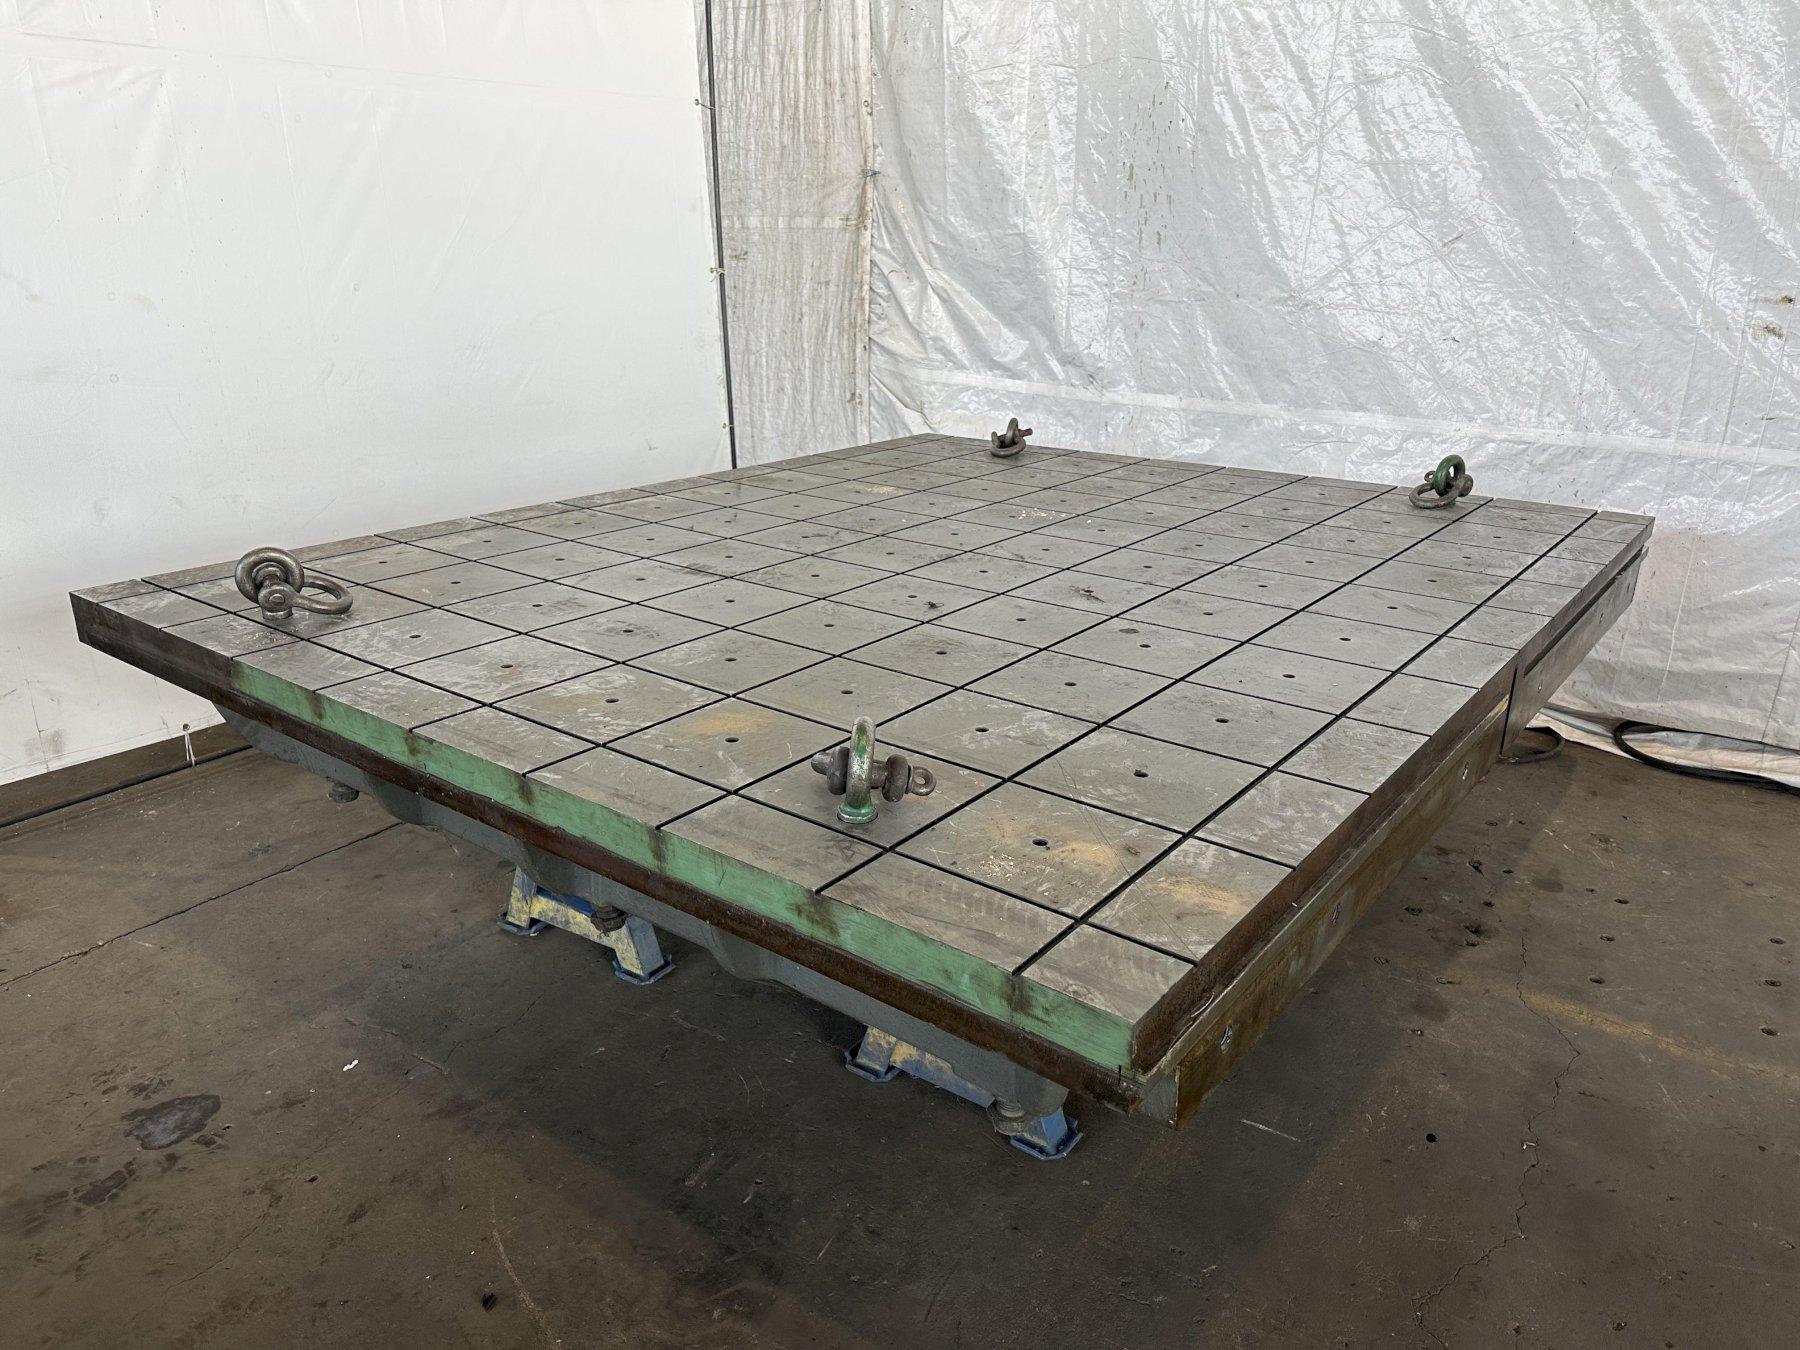 110" X 90" X 14" PORTAGE GRID LAYOUT TABLE. STOCK # 0522423